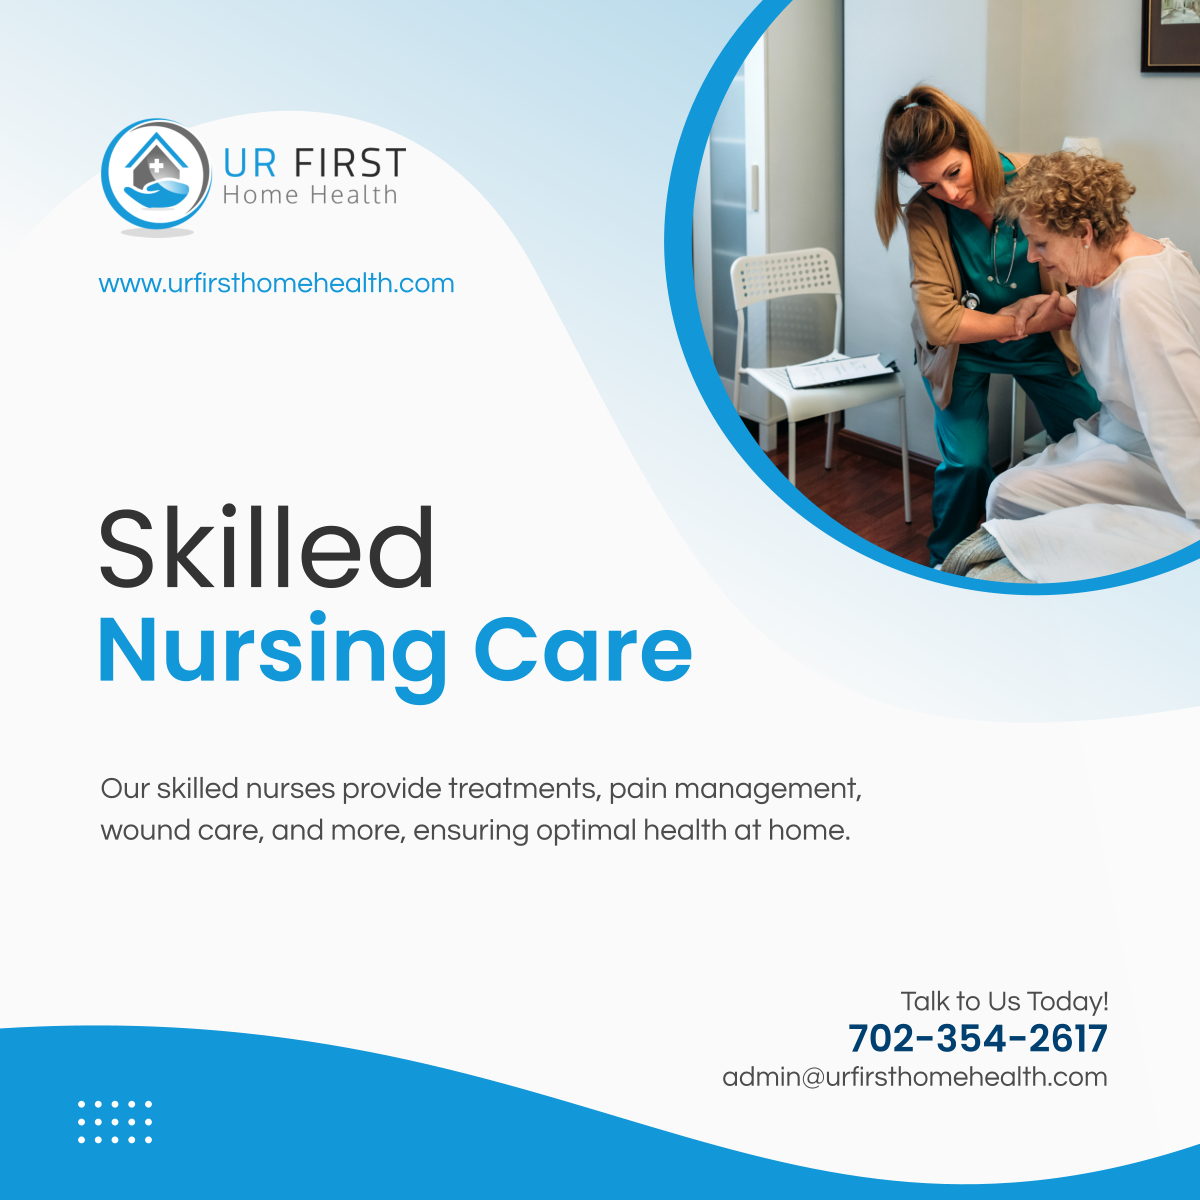 Experience top-notch skilled nursing care at home. Trust UR FIRST Home Health for comprehensive medical support. 

#LasVegasNV #HomeHealthCare #SkilledNursing #URFIRSTHomeHealth #NursingCare